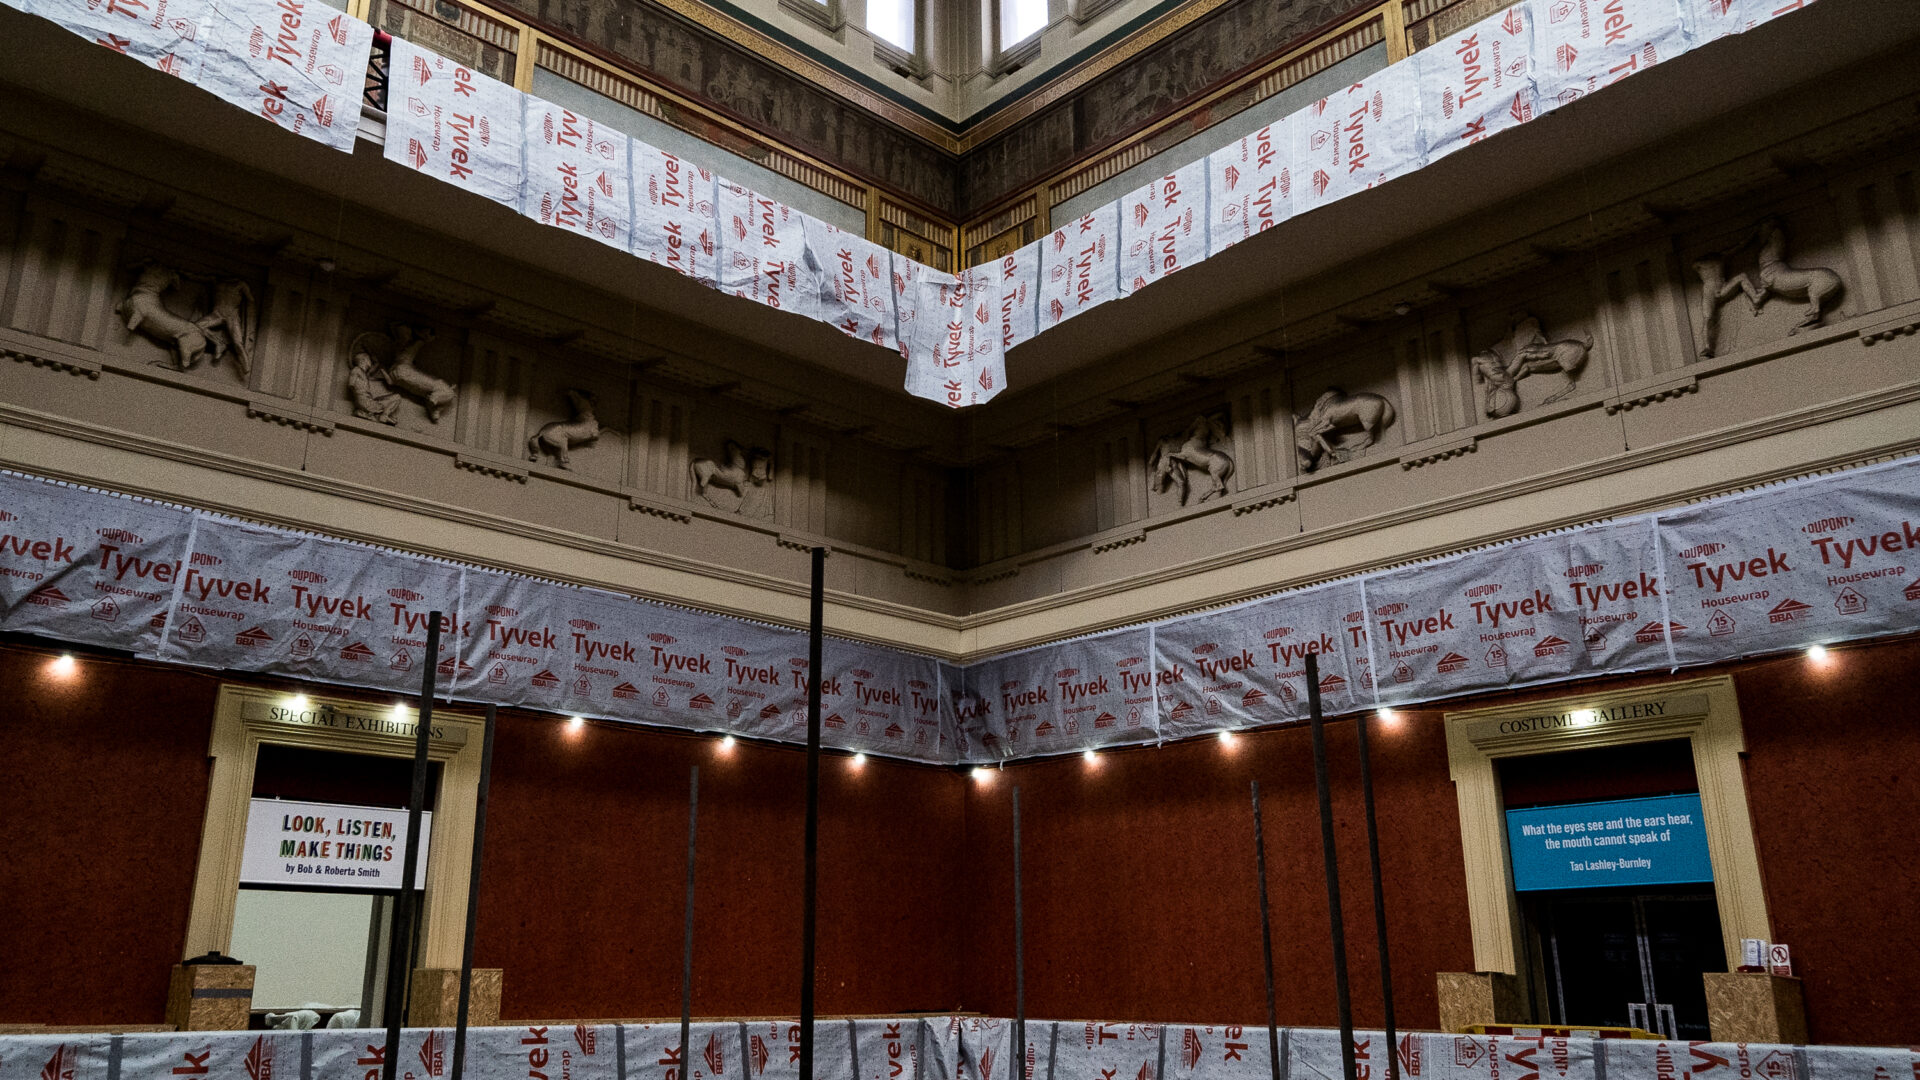 Image of the first floor of the Harris with Tyvek bags draped over the balcony